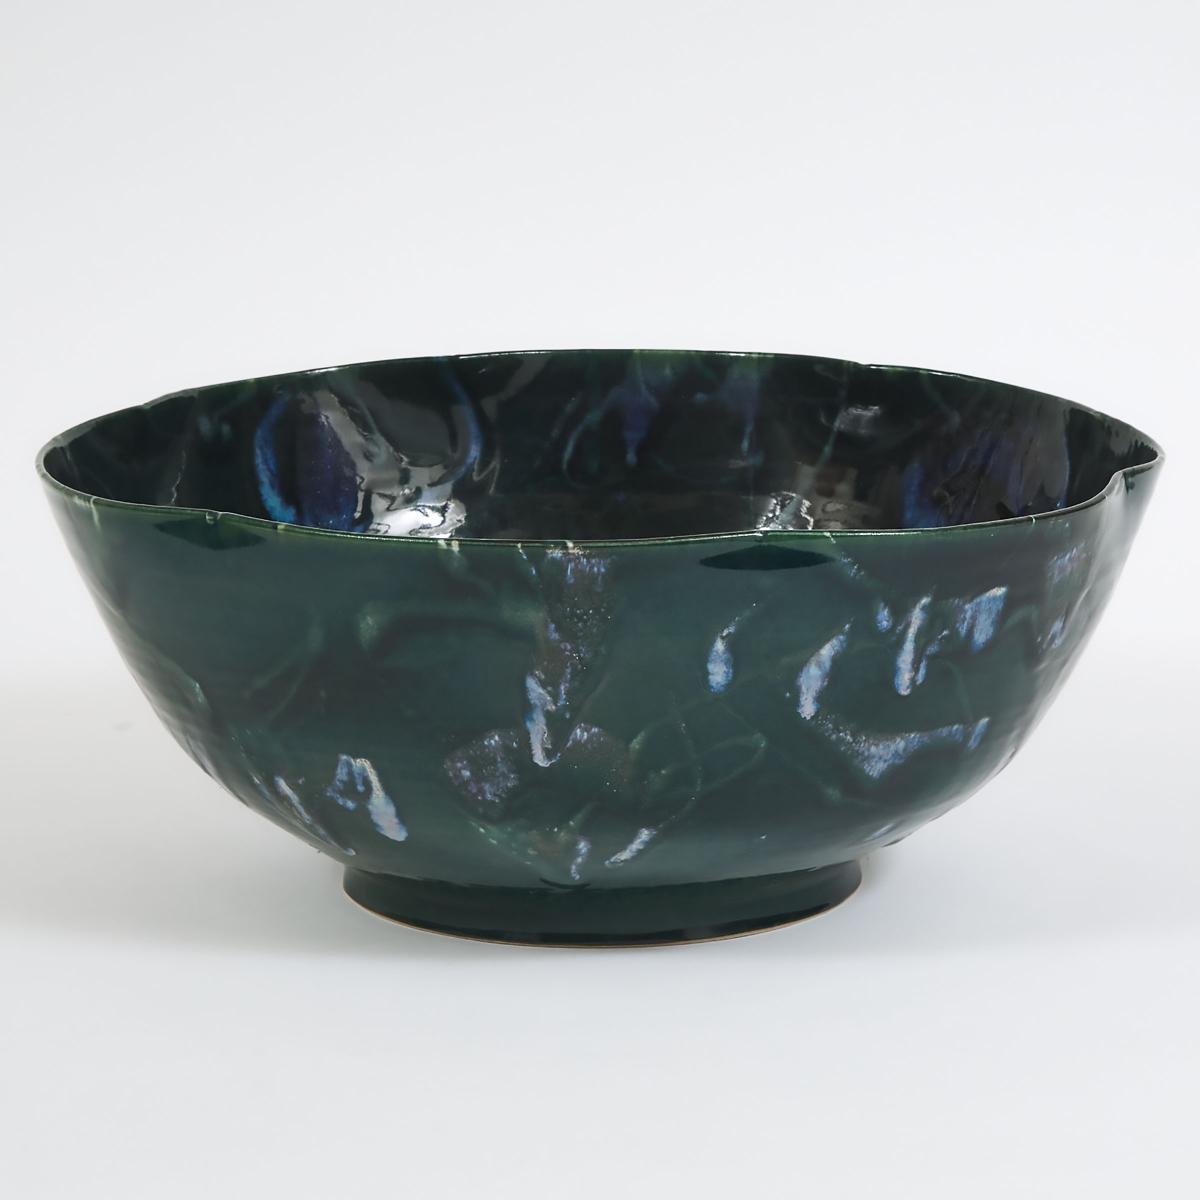 Kayo O'Young (Canadian, b.1950), Large Green and Blue Glazed Bowl, 1993, height 6.7 in — 17 cm, diam